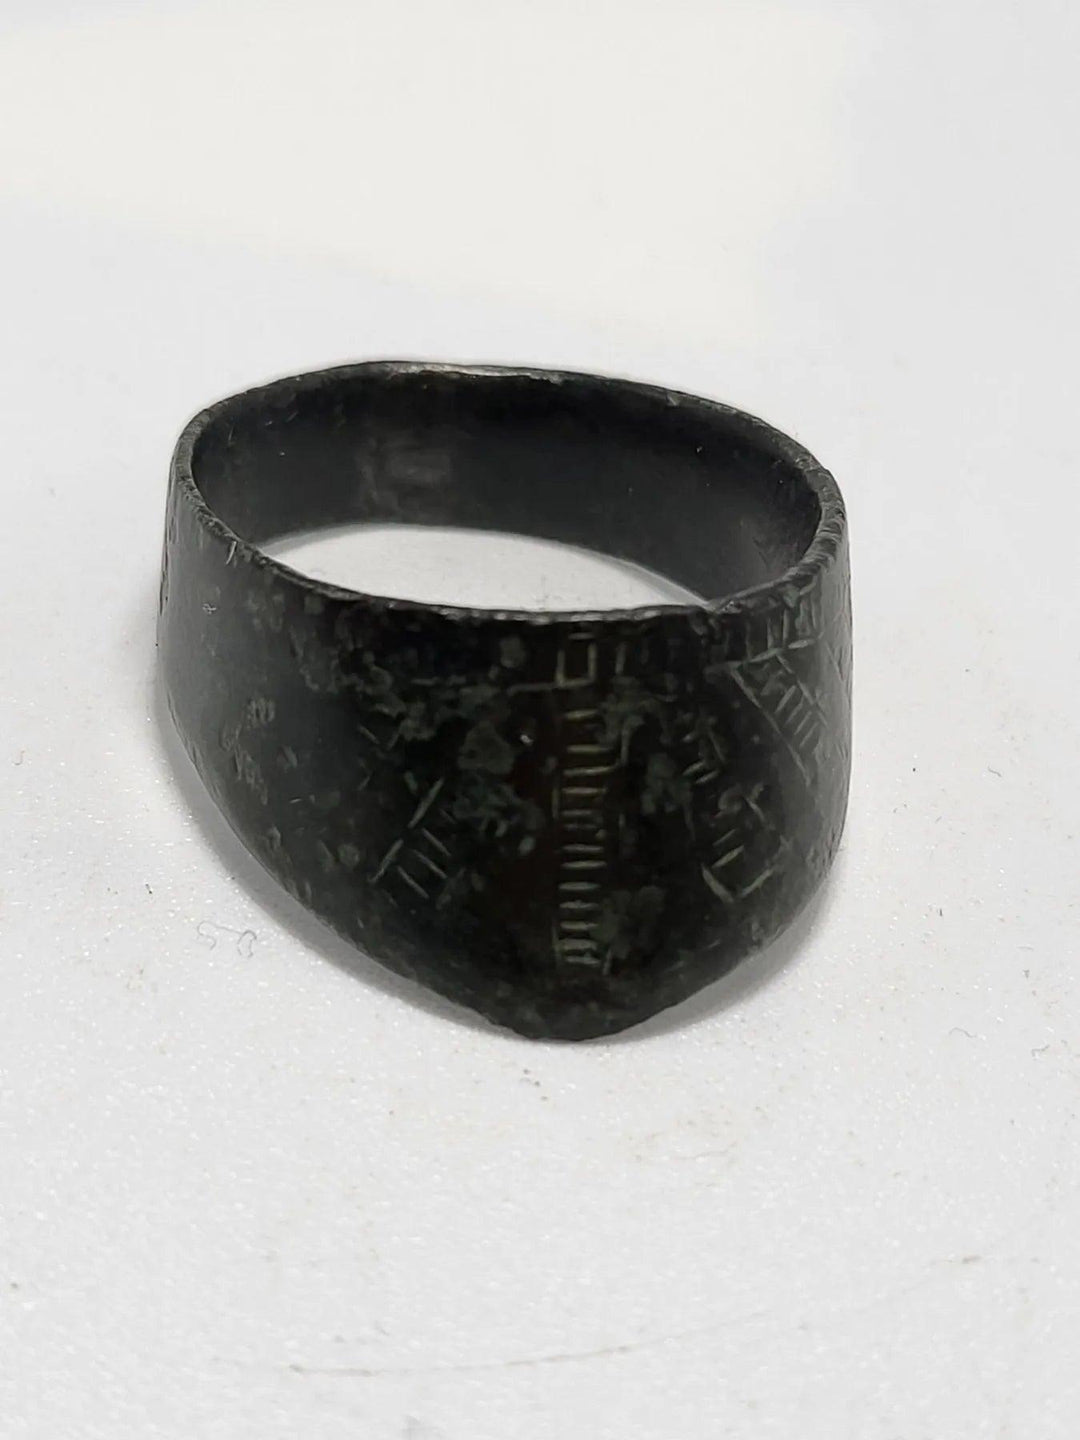 Medieval Roman Bronze Archer's Thumb Ring - 8th to 10th Century CE | Battle-Ready Ornamentation